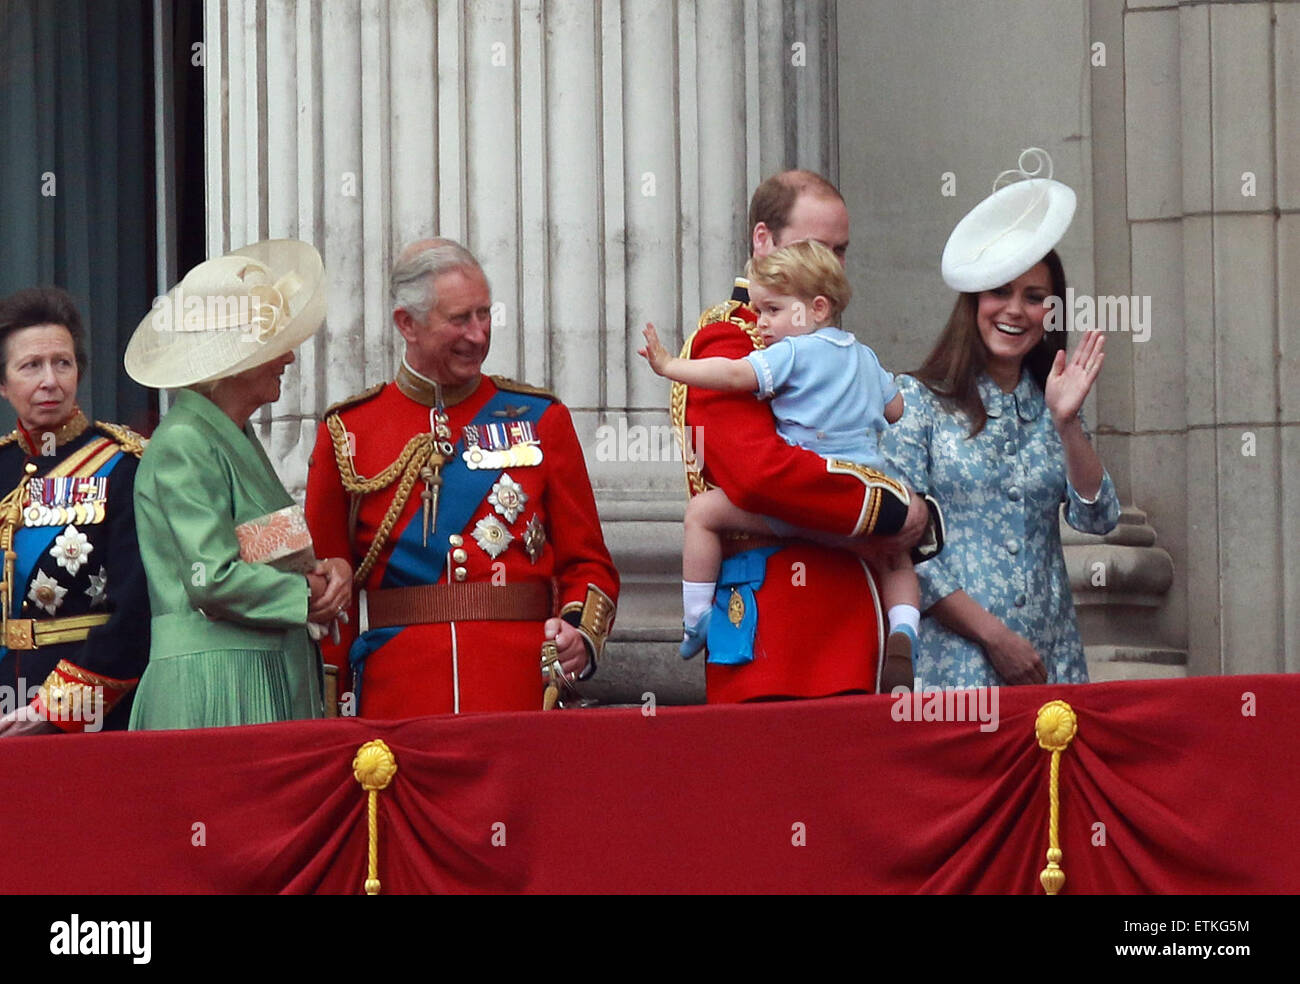 Trooping the Colour . . London, UK . . 13.06.2015 Prince George and Kate (Catherine Middleton) Duchess of Cambridge, wave to the crowd as his father Prince William, Duke of Cambridge, takes him back inside at the Trooping of the Colour 2015. His Grandfather Prince Charles, Prince of Wales, and Camilla, Duchess of Cornwall, look on admiringly. Pic: Paul Marriott Photography Stock Photo